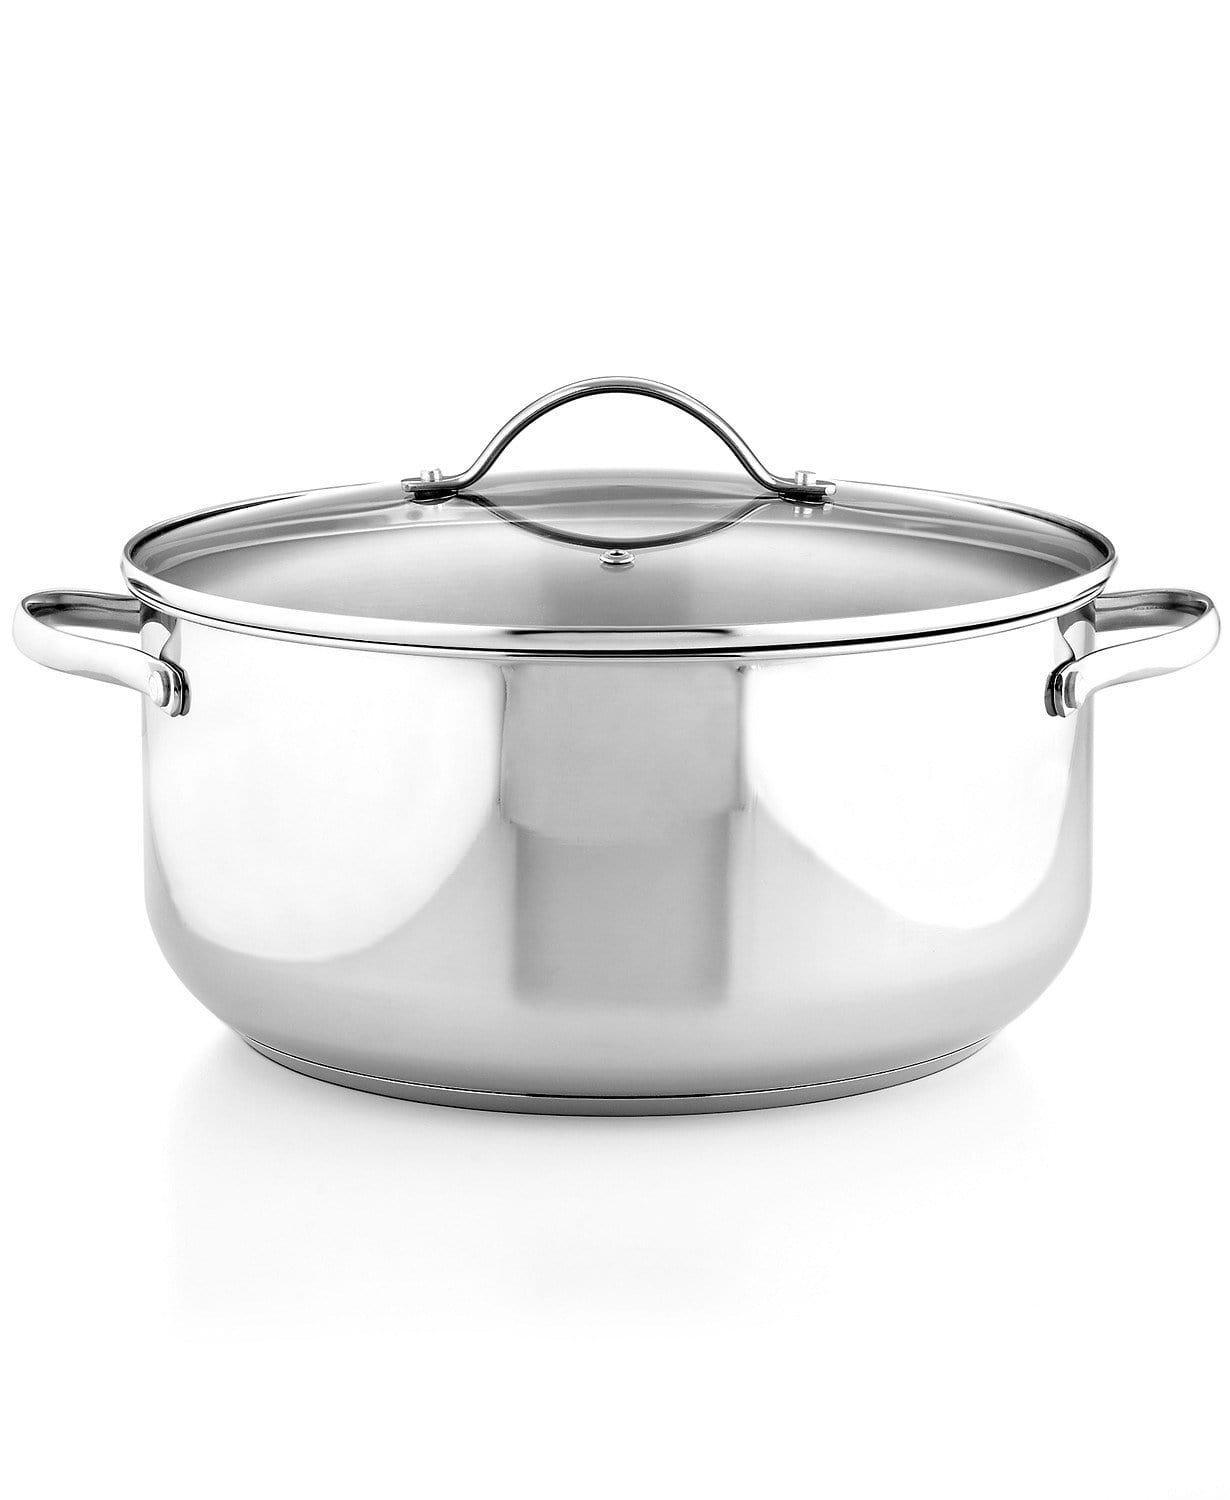 Tools of the Trade Kitchenware Stainless Steel 8 Qt. Casserole with Lid